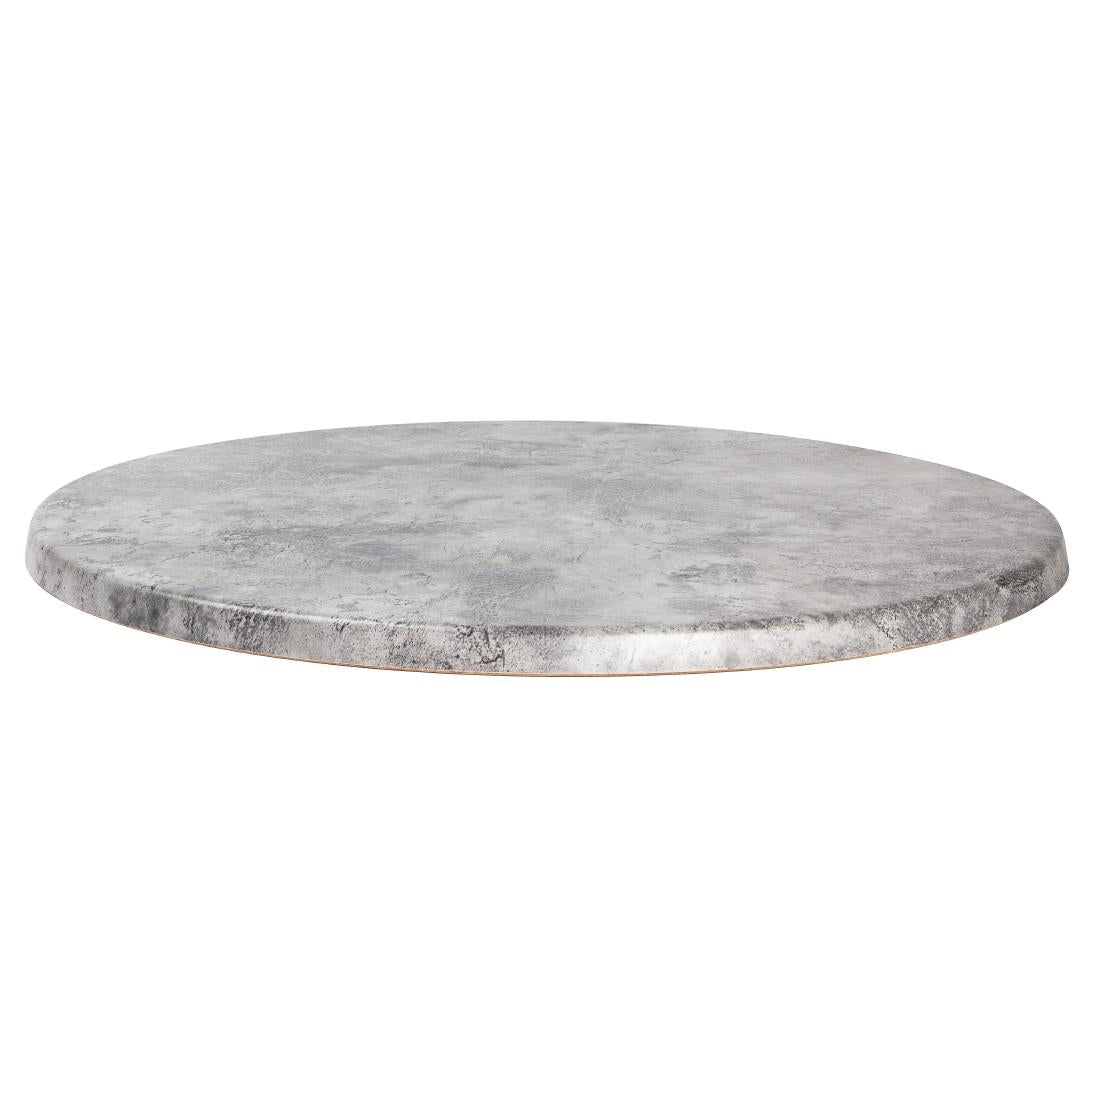 GM420 Werzalit Pre-Drilled Round Table Top Concrete 600mm JD Catering Equipment Solutions Ltd